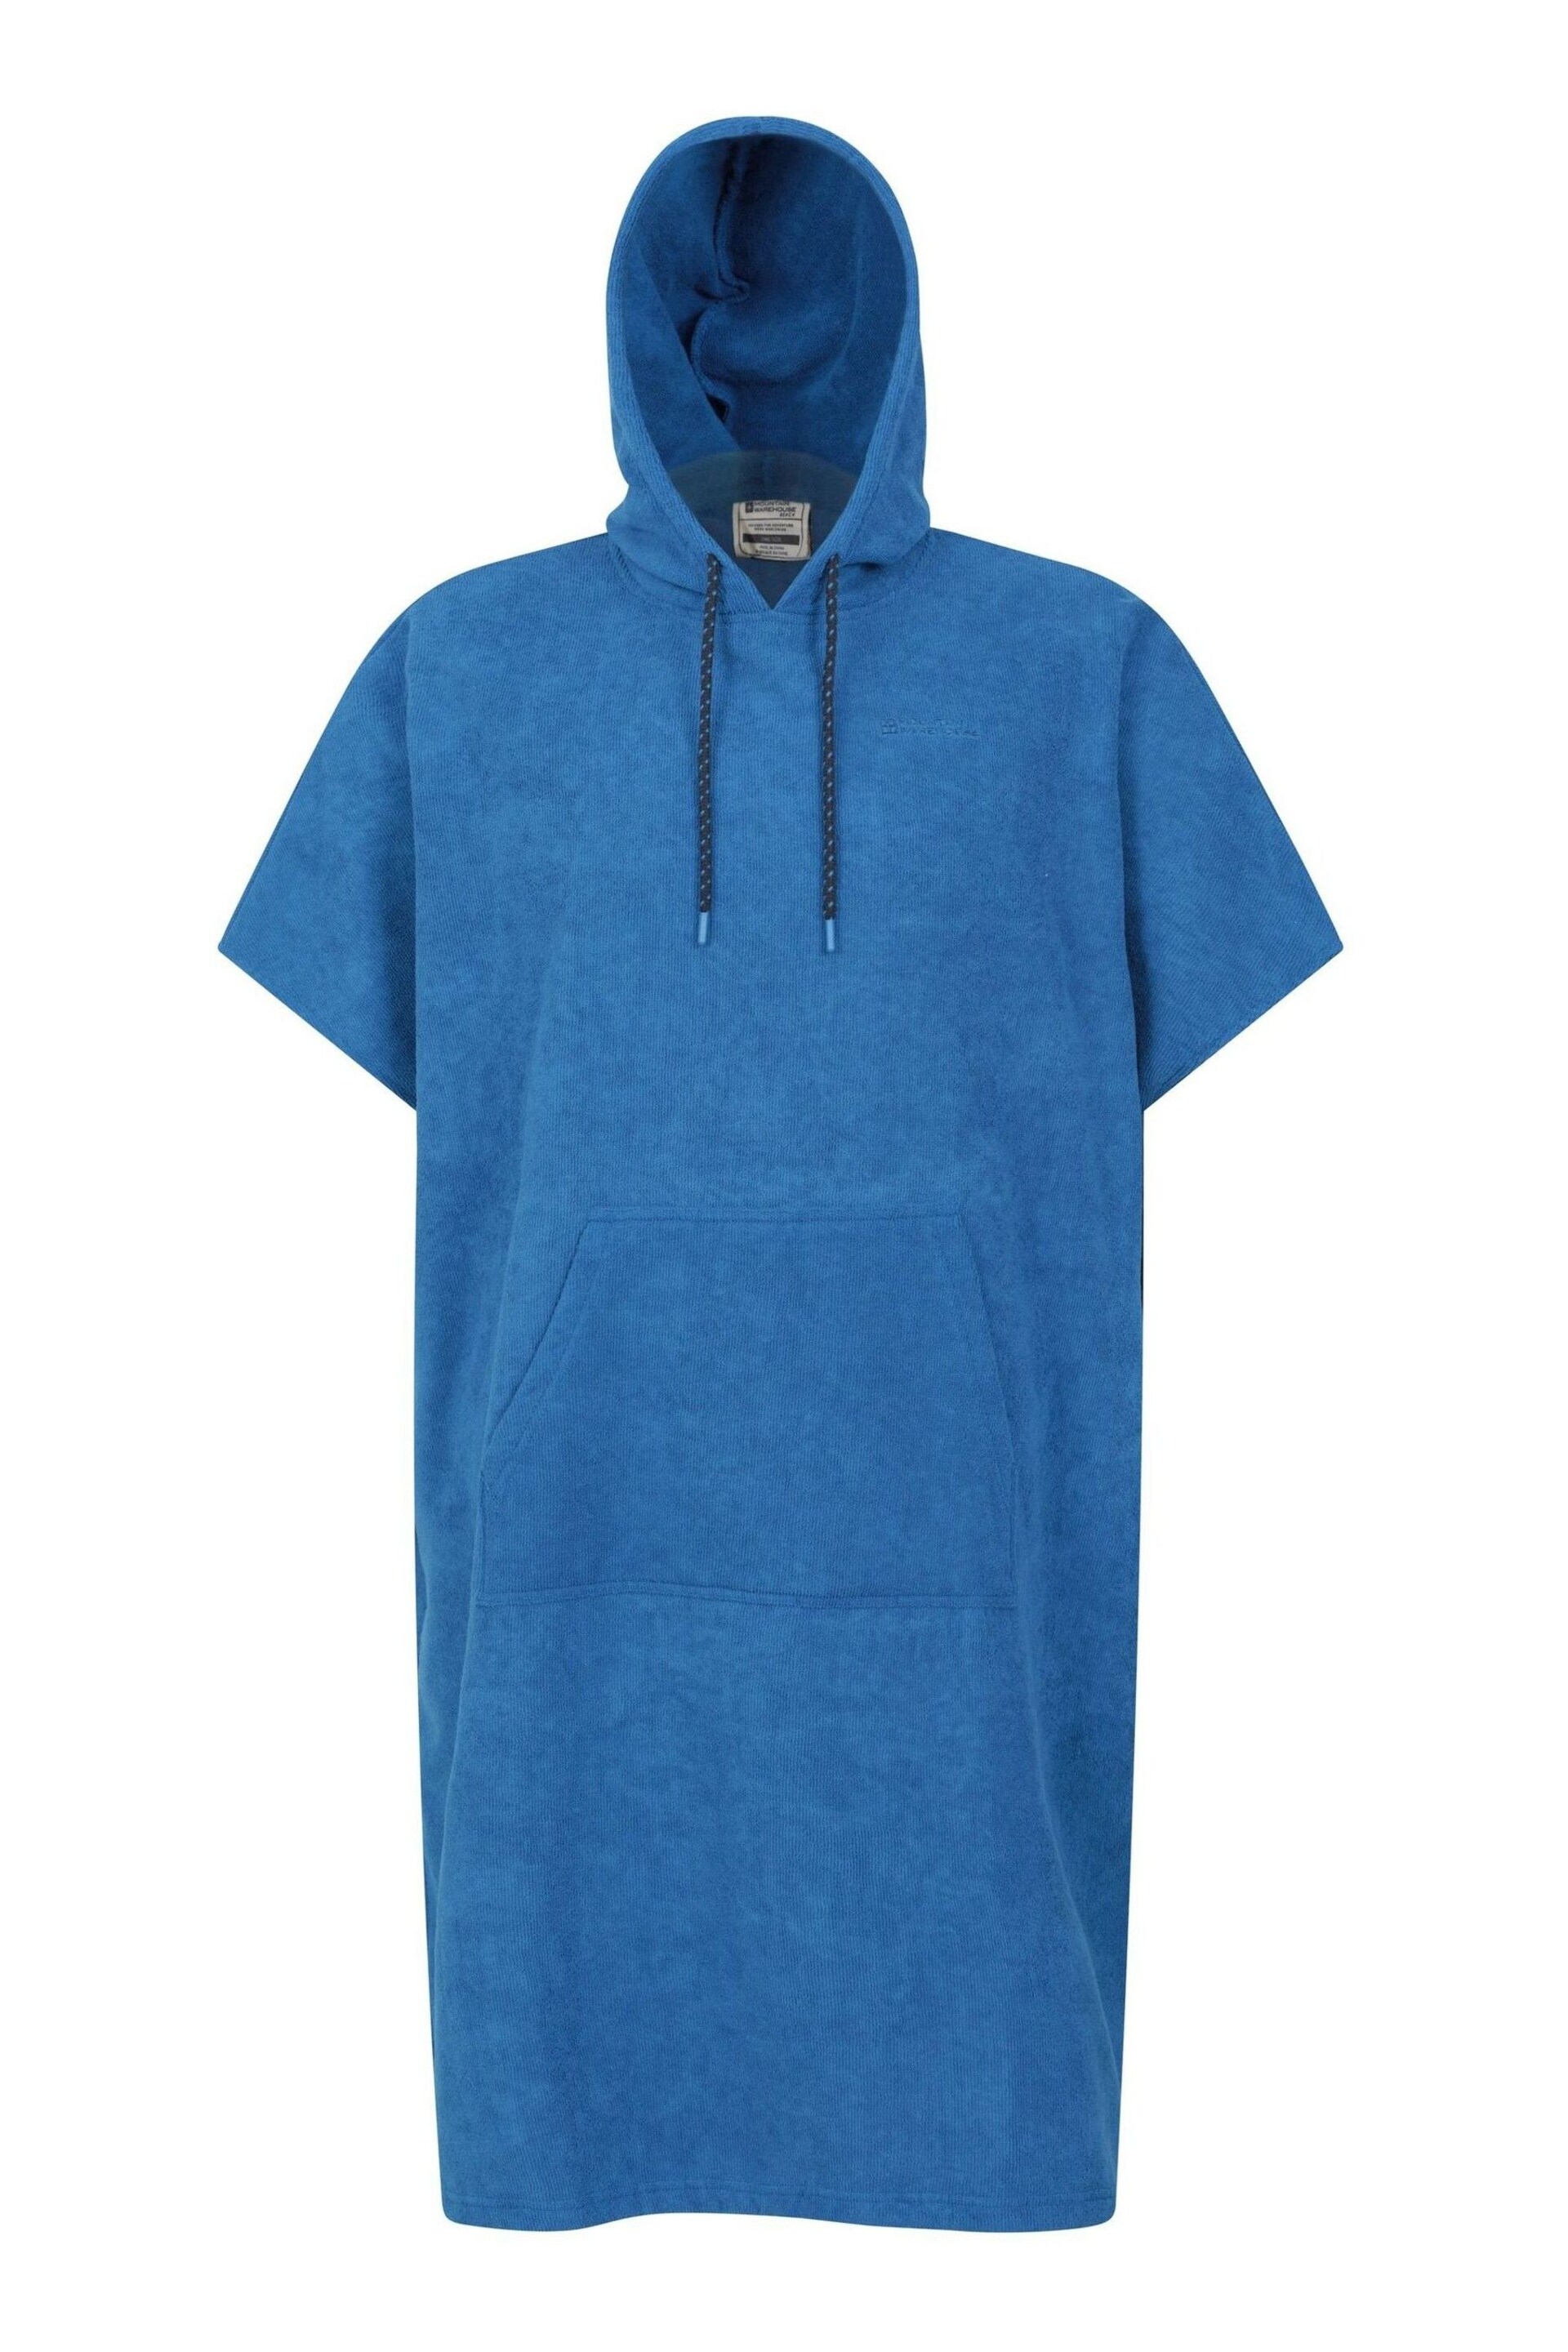 Mountain Warehouse Blue Driftwood Mens Poncho Changing Robe - Image 1 of 5